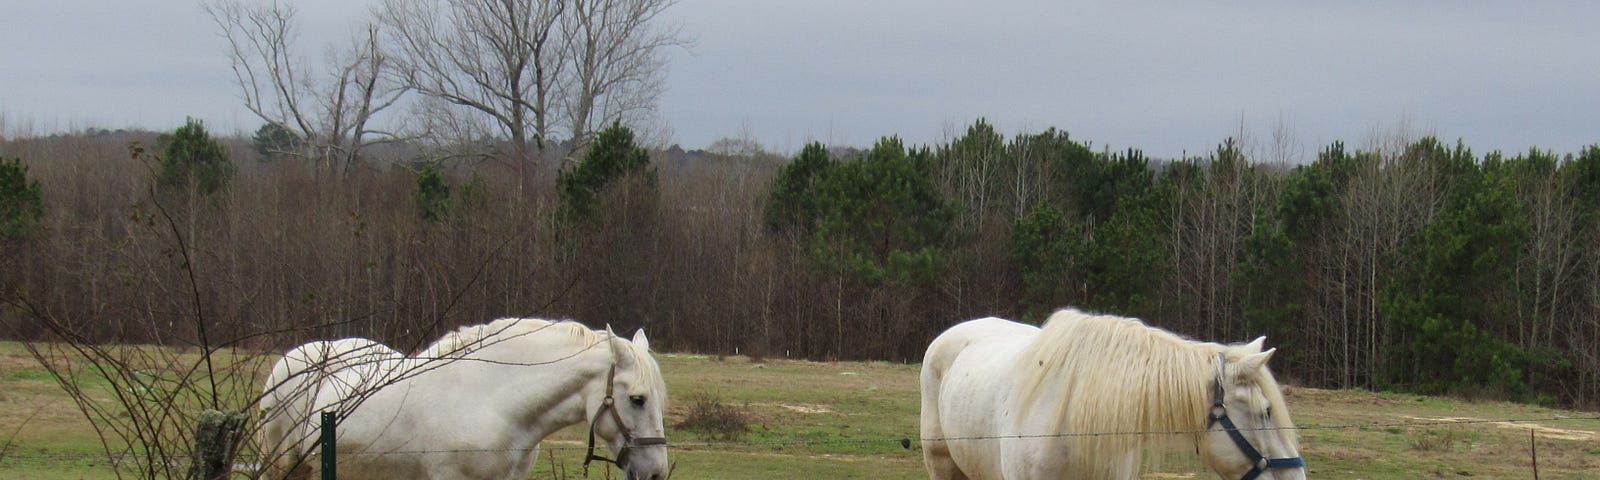 Photo of two large white horses grazing next to wire fence and overgrown grass